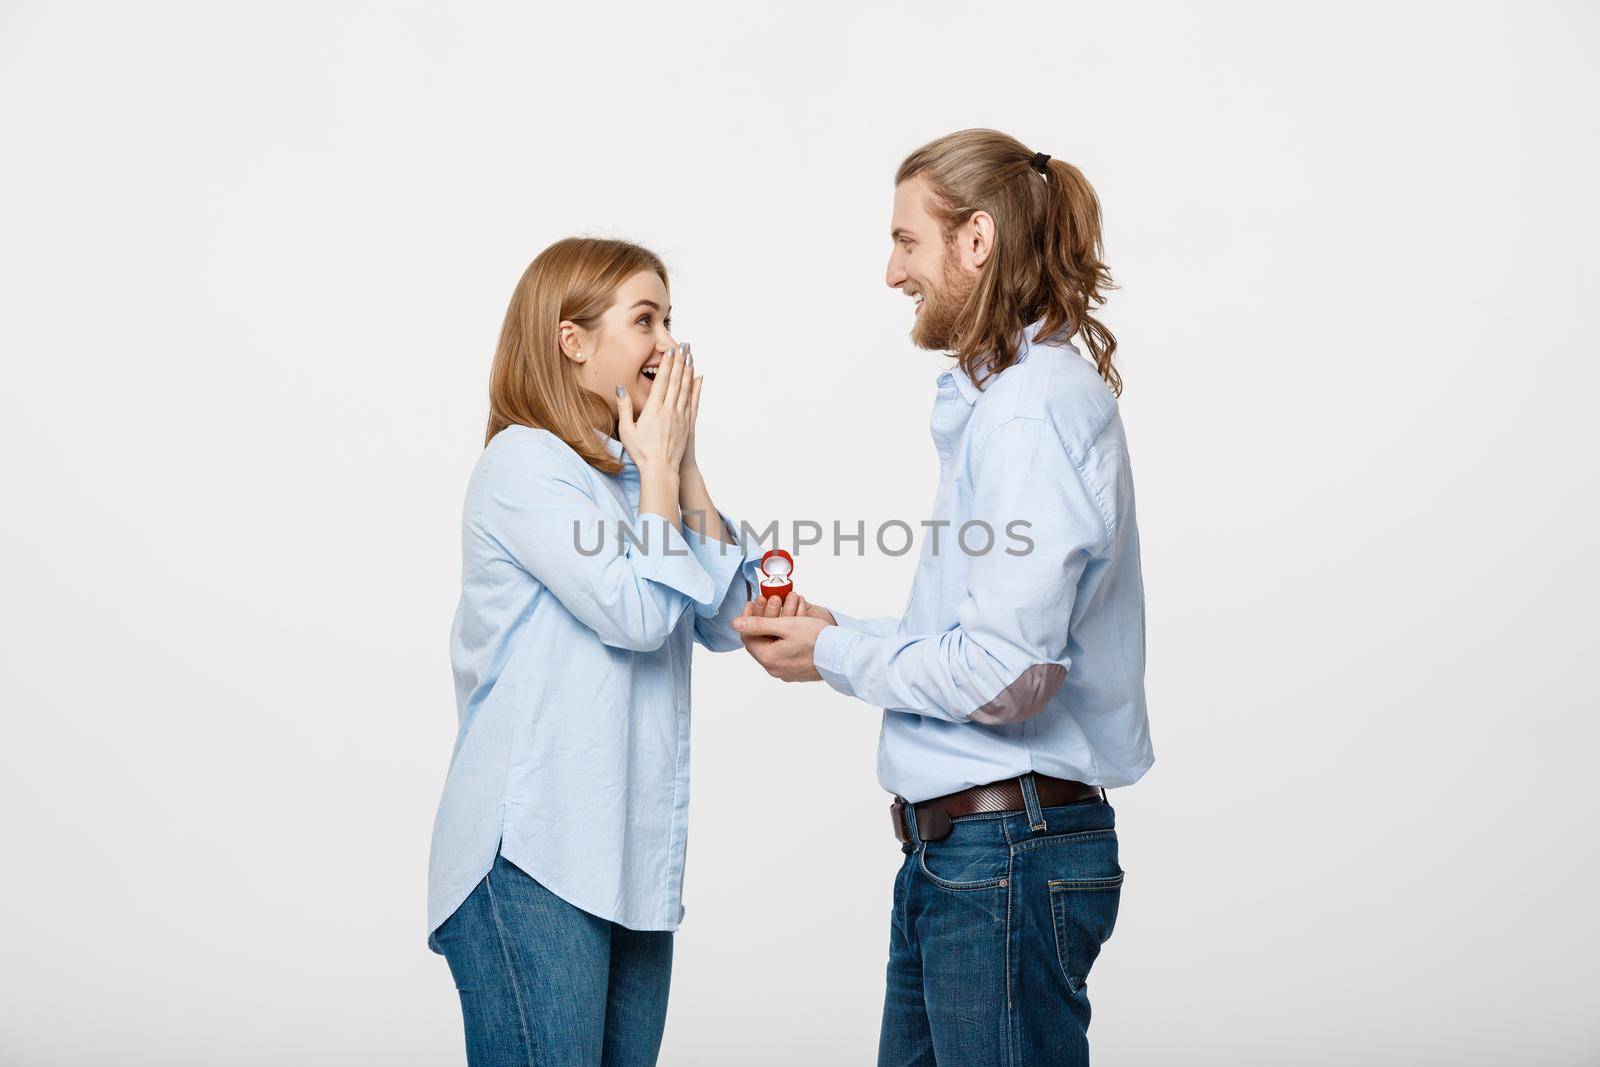 Proposal concept - Portrait of man showing an engagement ring diamond to his beutiful girlfriend over isolated white background .